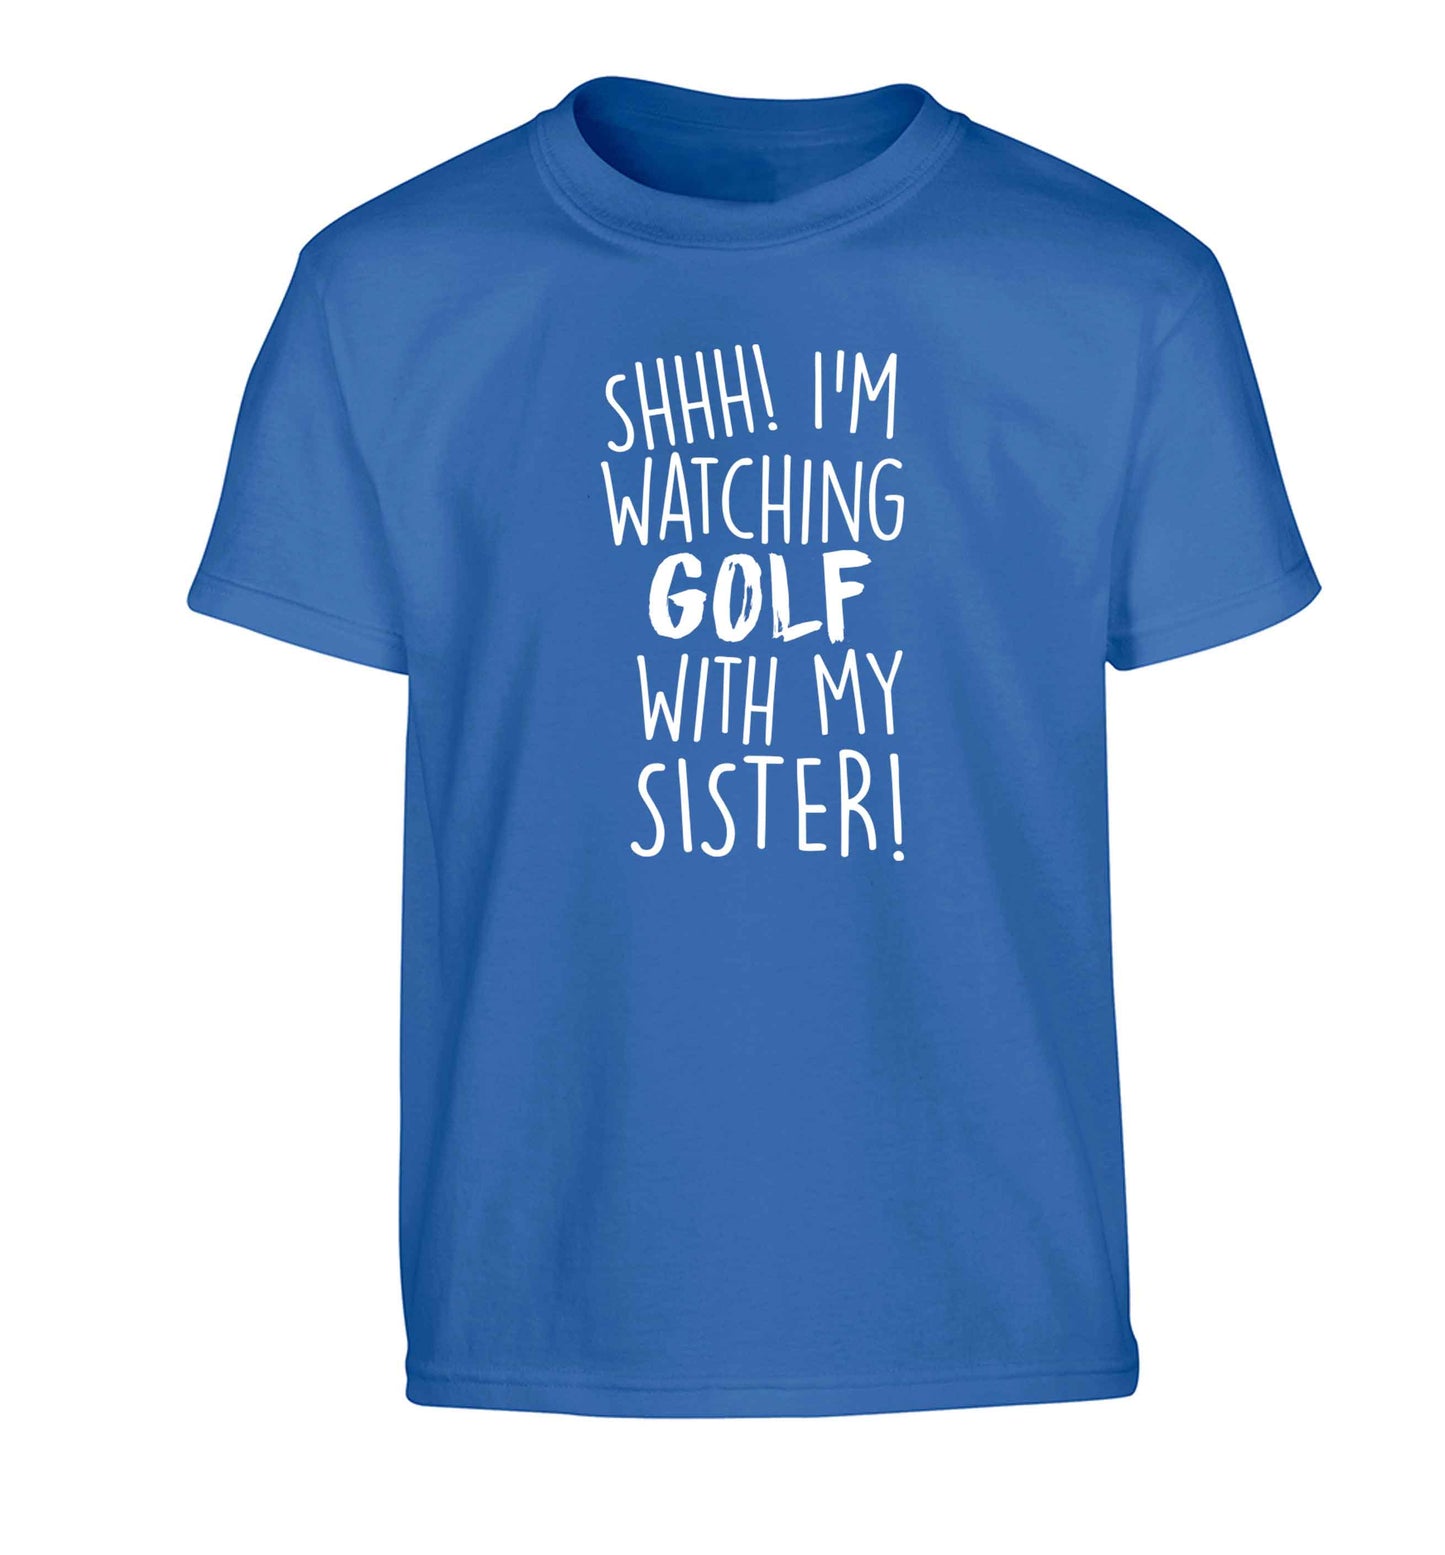 Shh I'm watching golf with my sister Children's blue Tshirt 12-13 Years